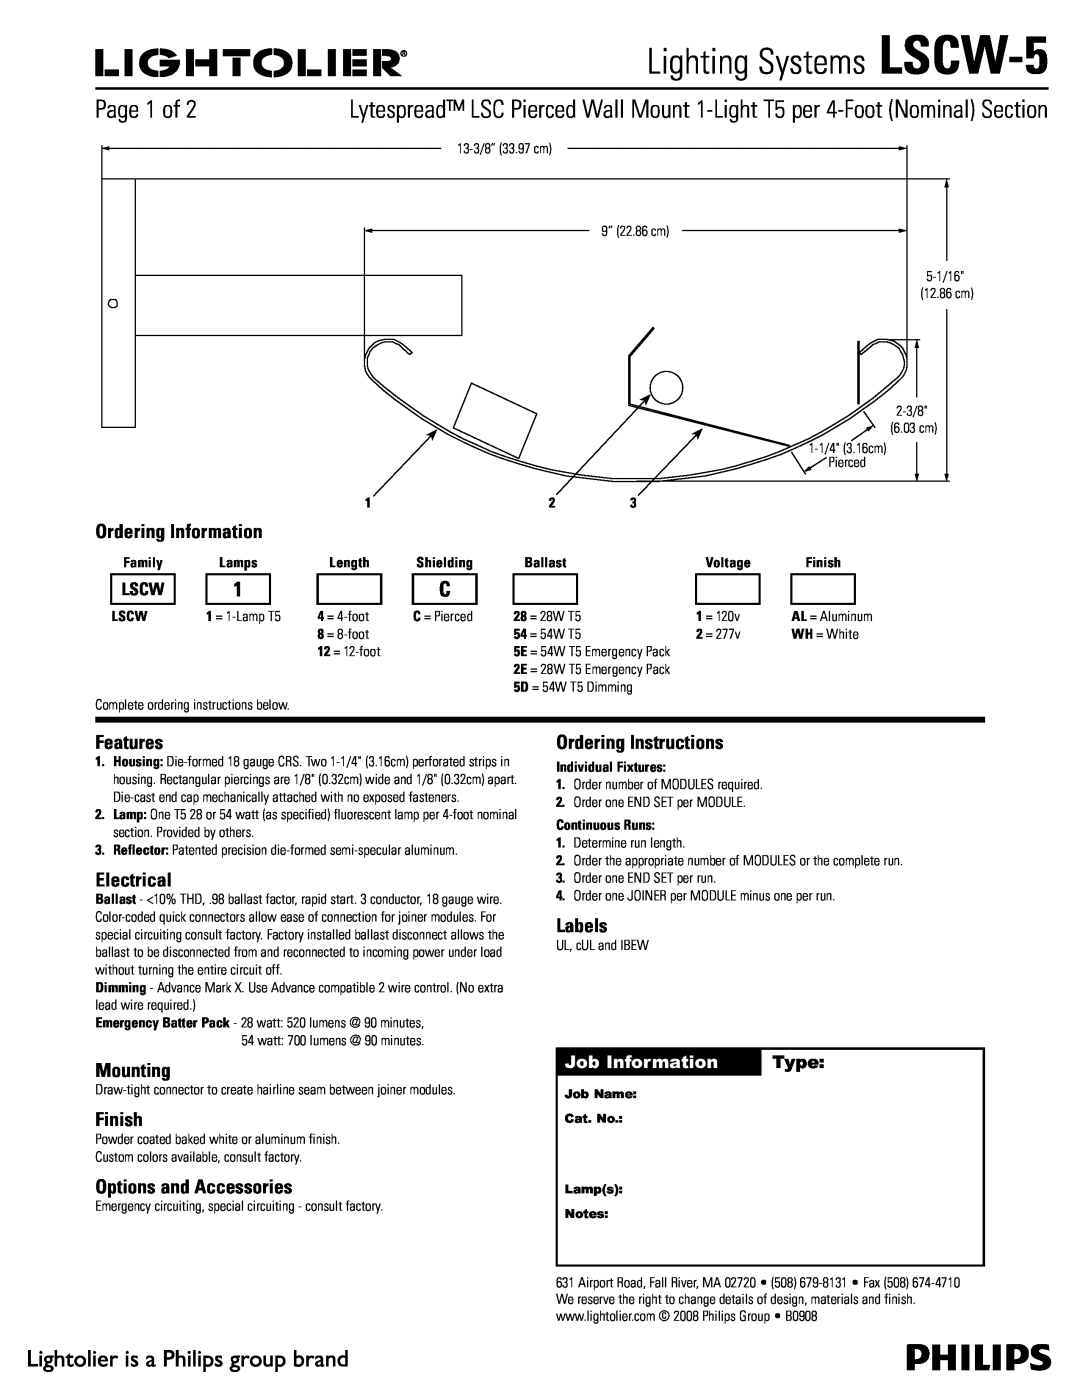 Lightolier LSCW-5 manual Ordering Information, Features, Electrical, Mounting, Finish, Options and Accessories, Labels 